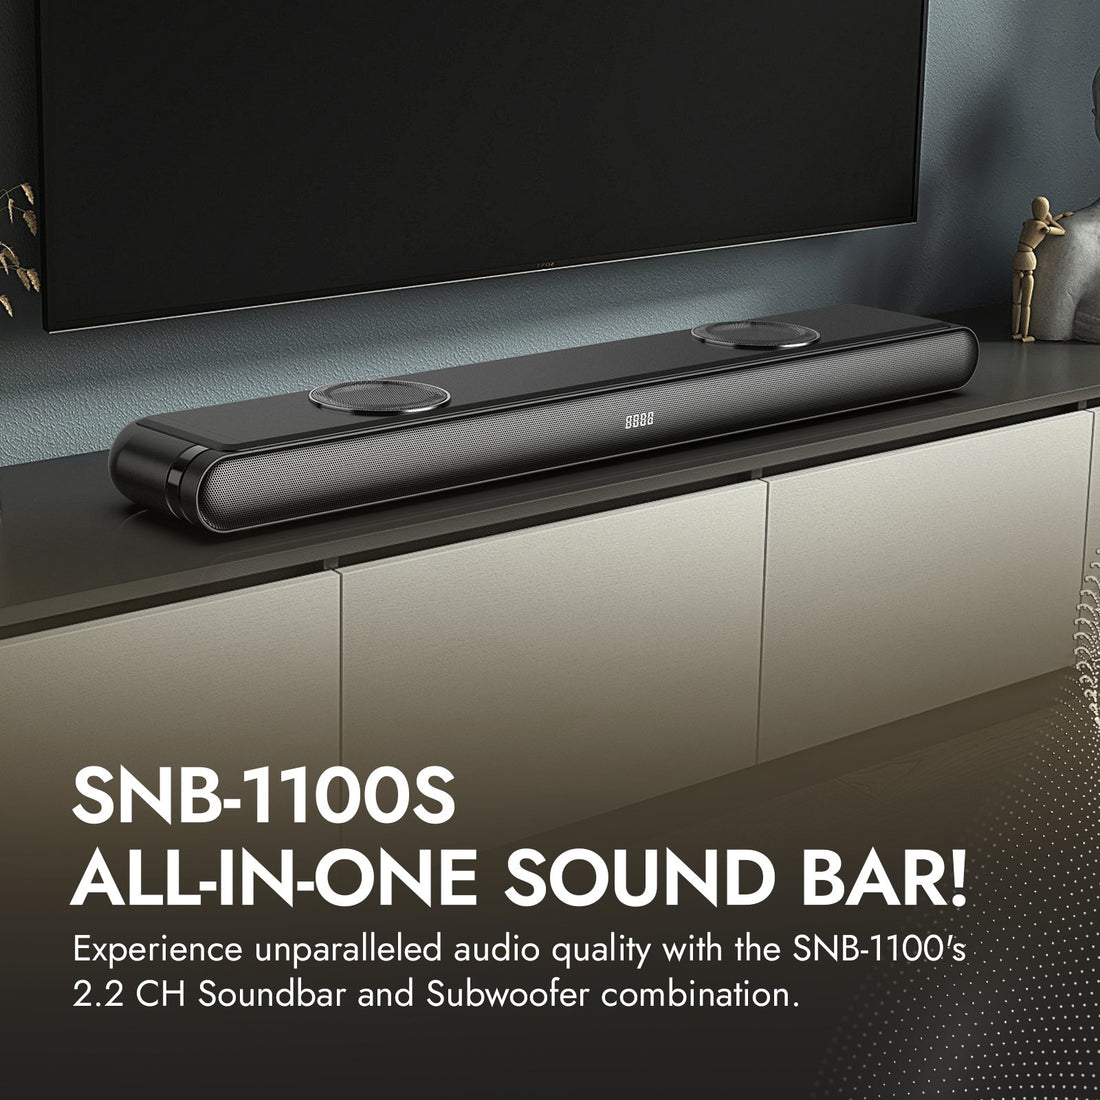 Dolphin SNB-1100S All-In-One Soundbar with Subwoofer, Loud with Deep Bass - Top ElectrosSpeakersSNB-1100S810059431461